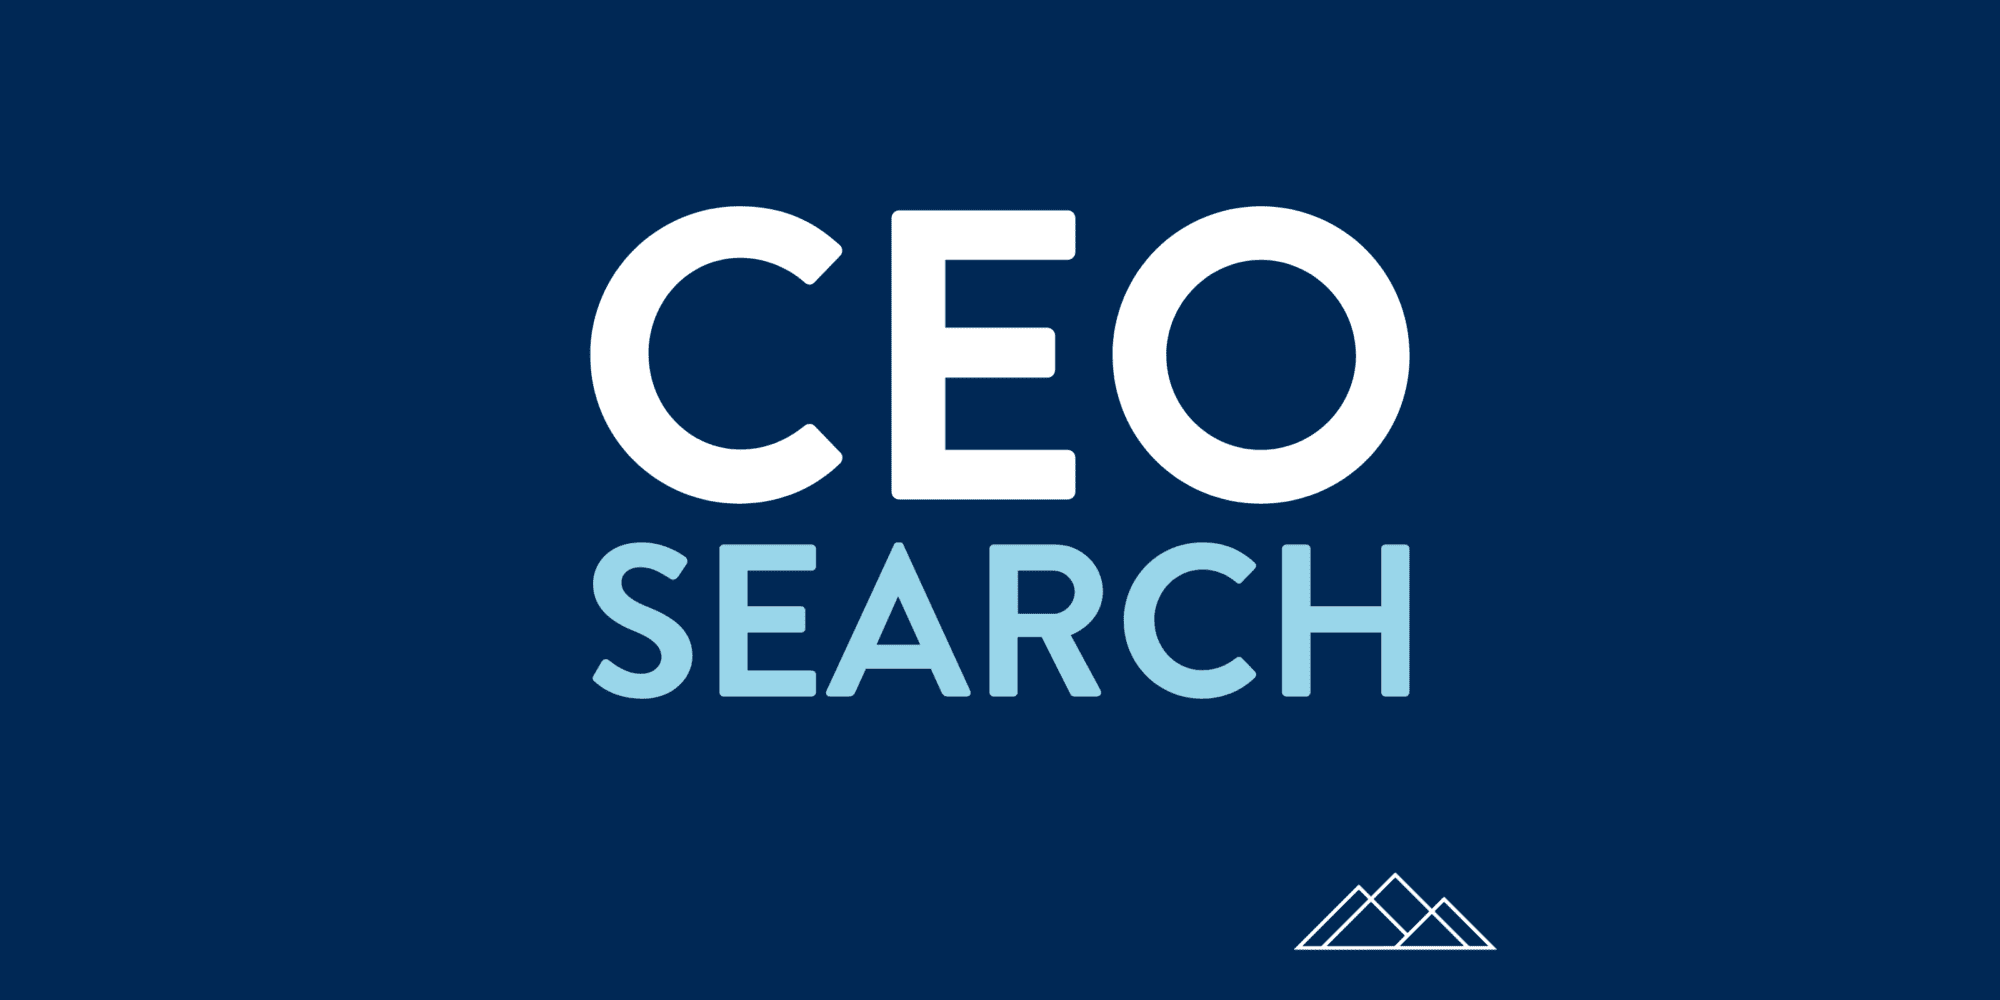 A designed image that says, "CEO SEARCH."